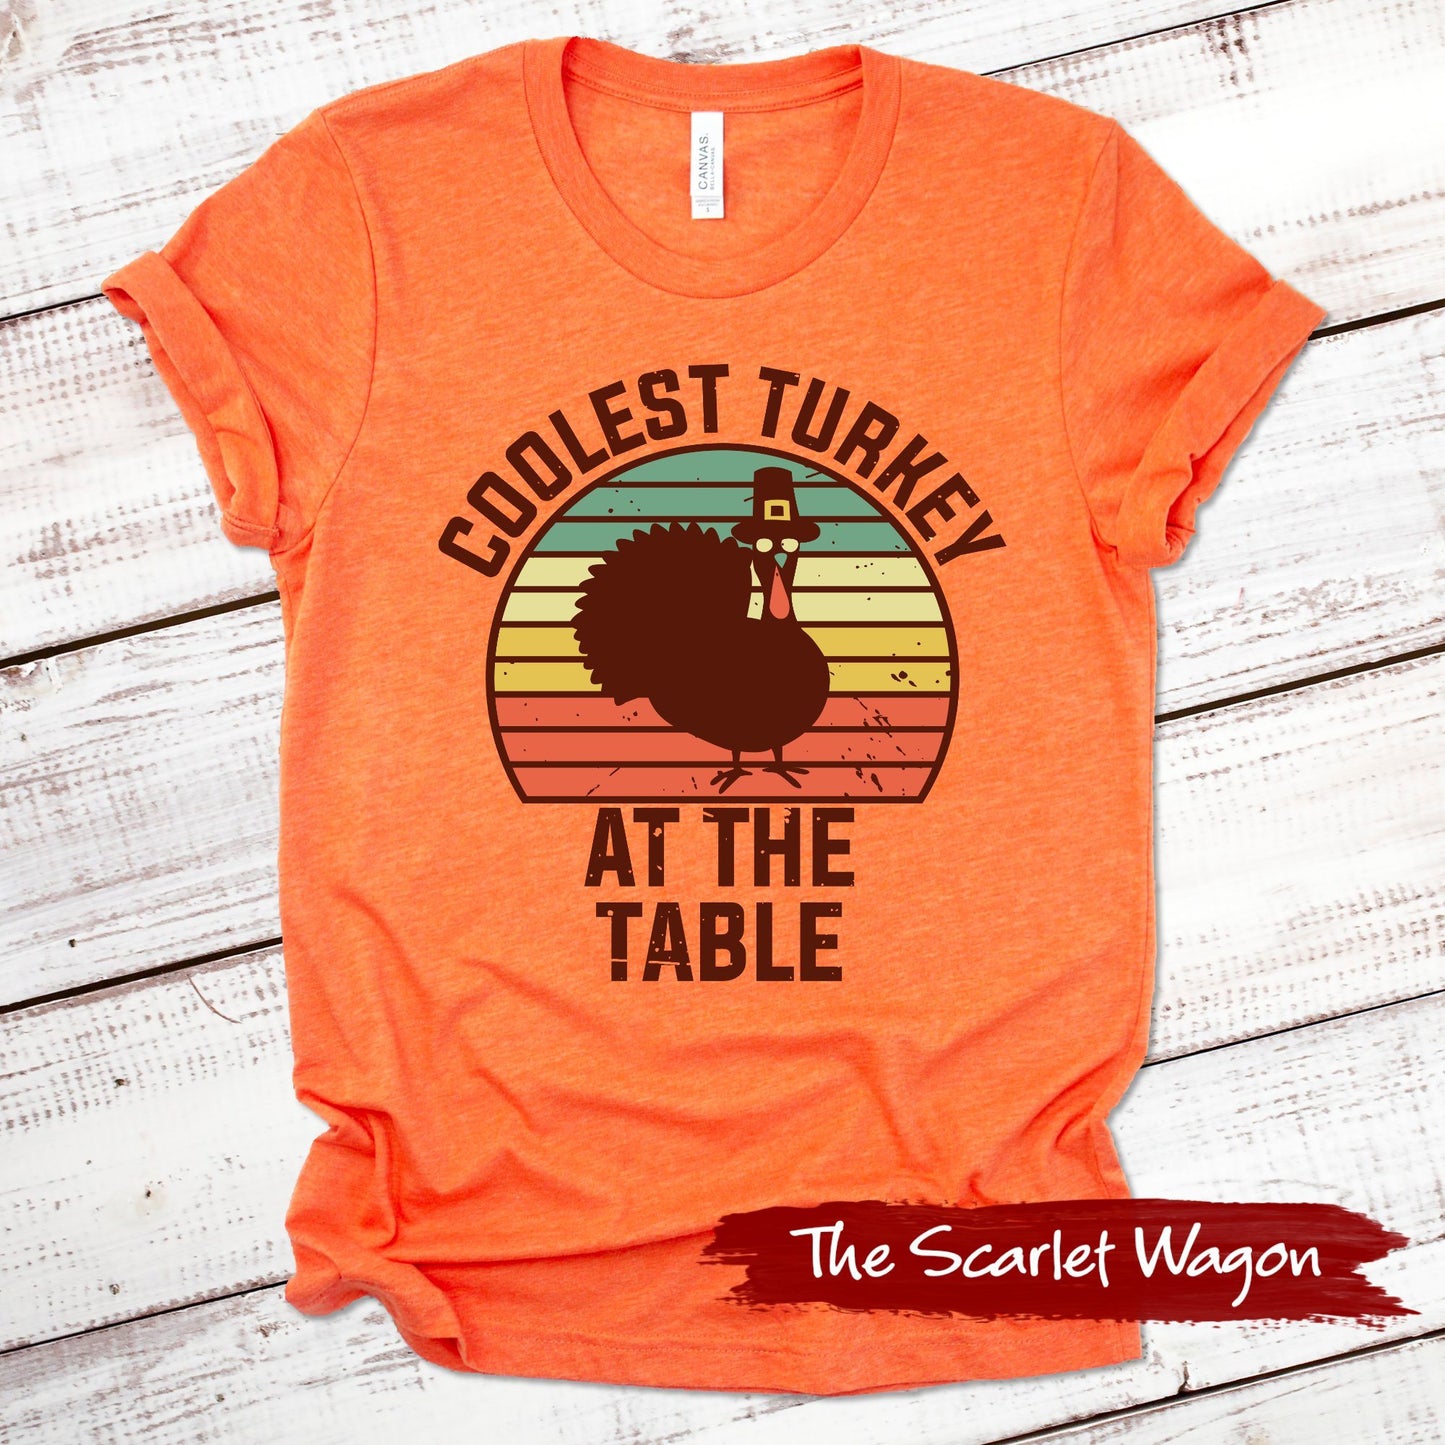 Coolest Turkey at the Table Fall Shirts Scarlet Wagon Heather Orange XS 